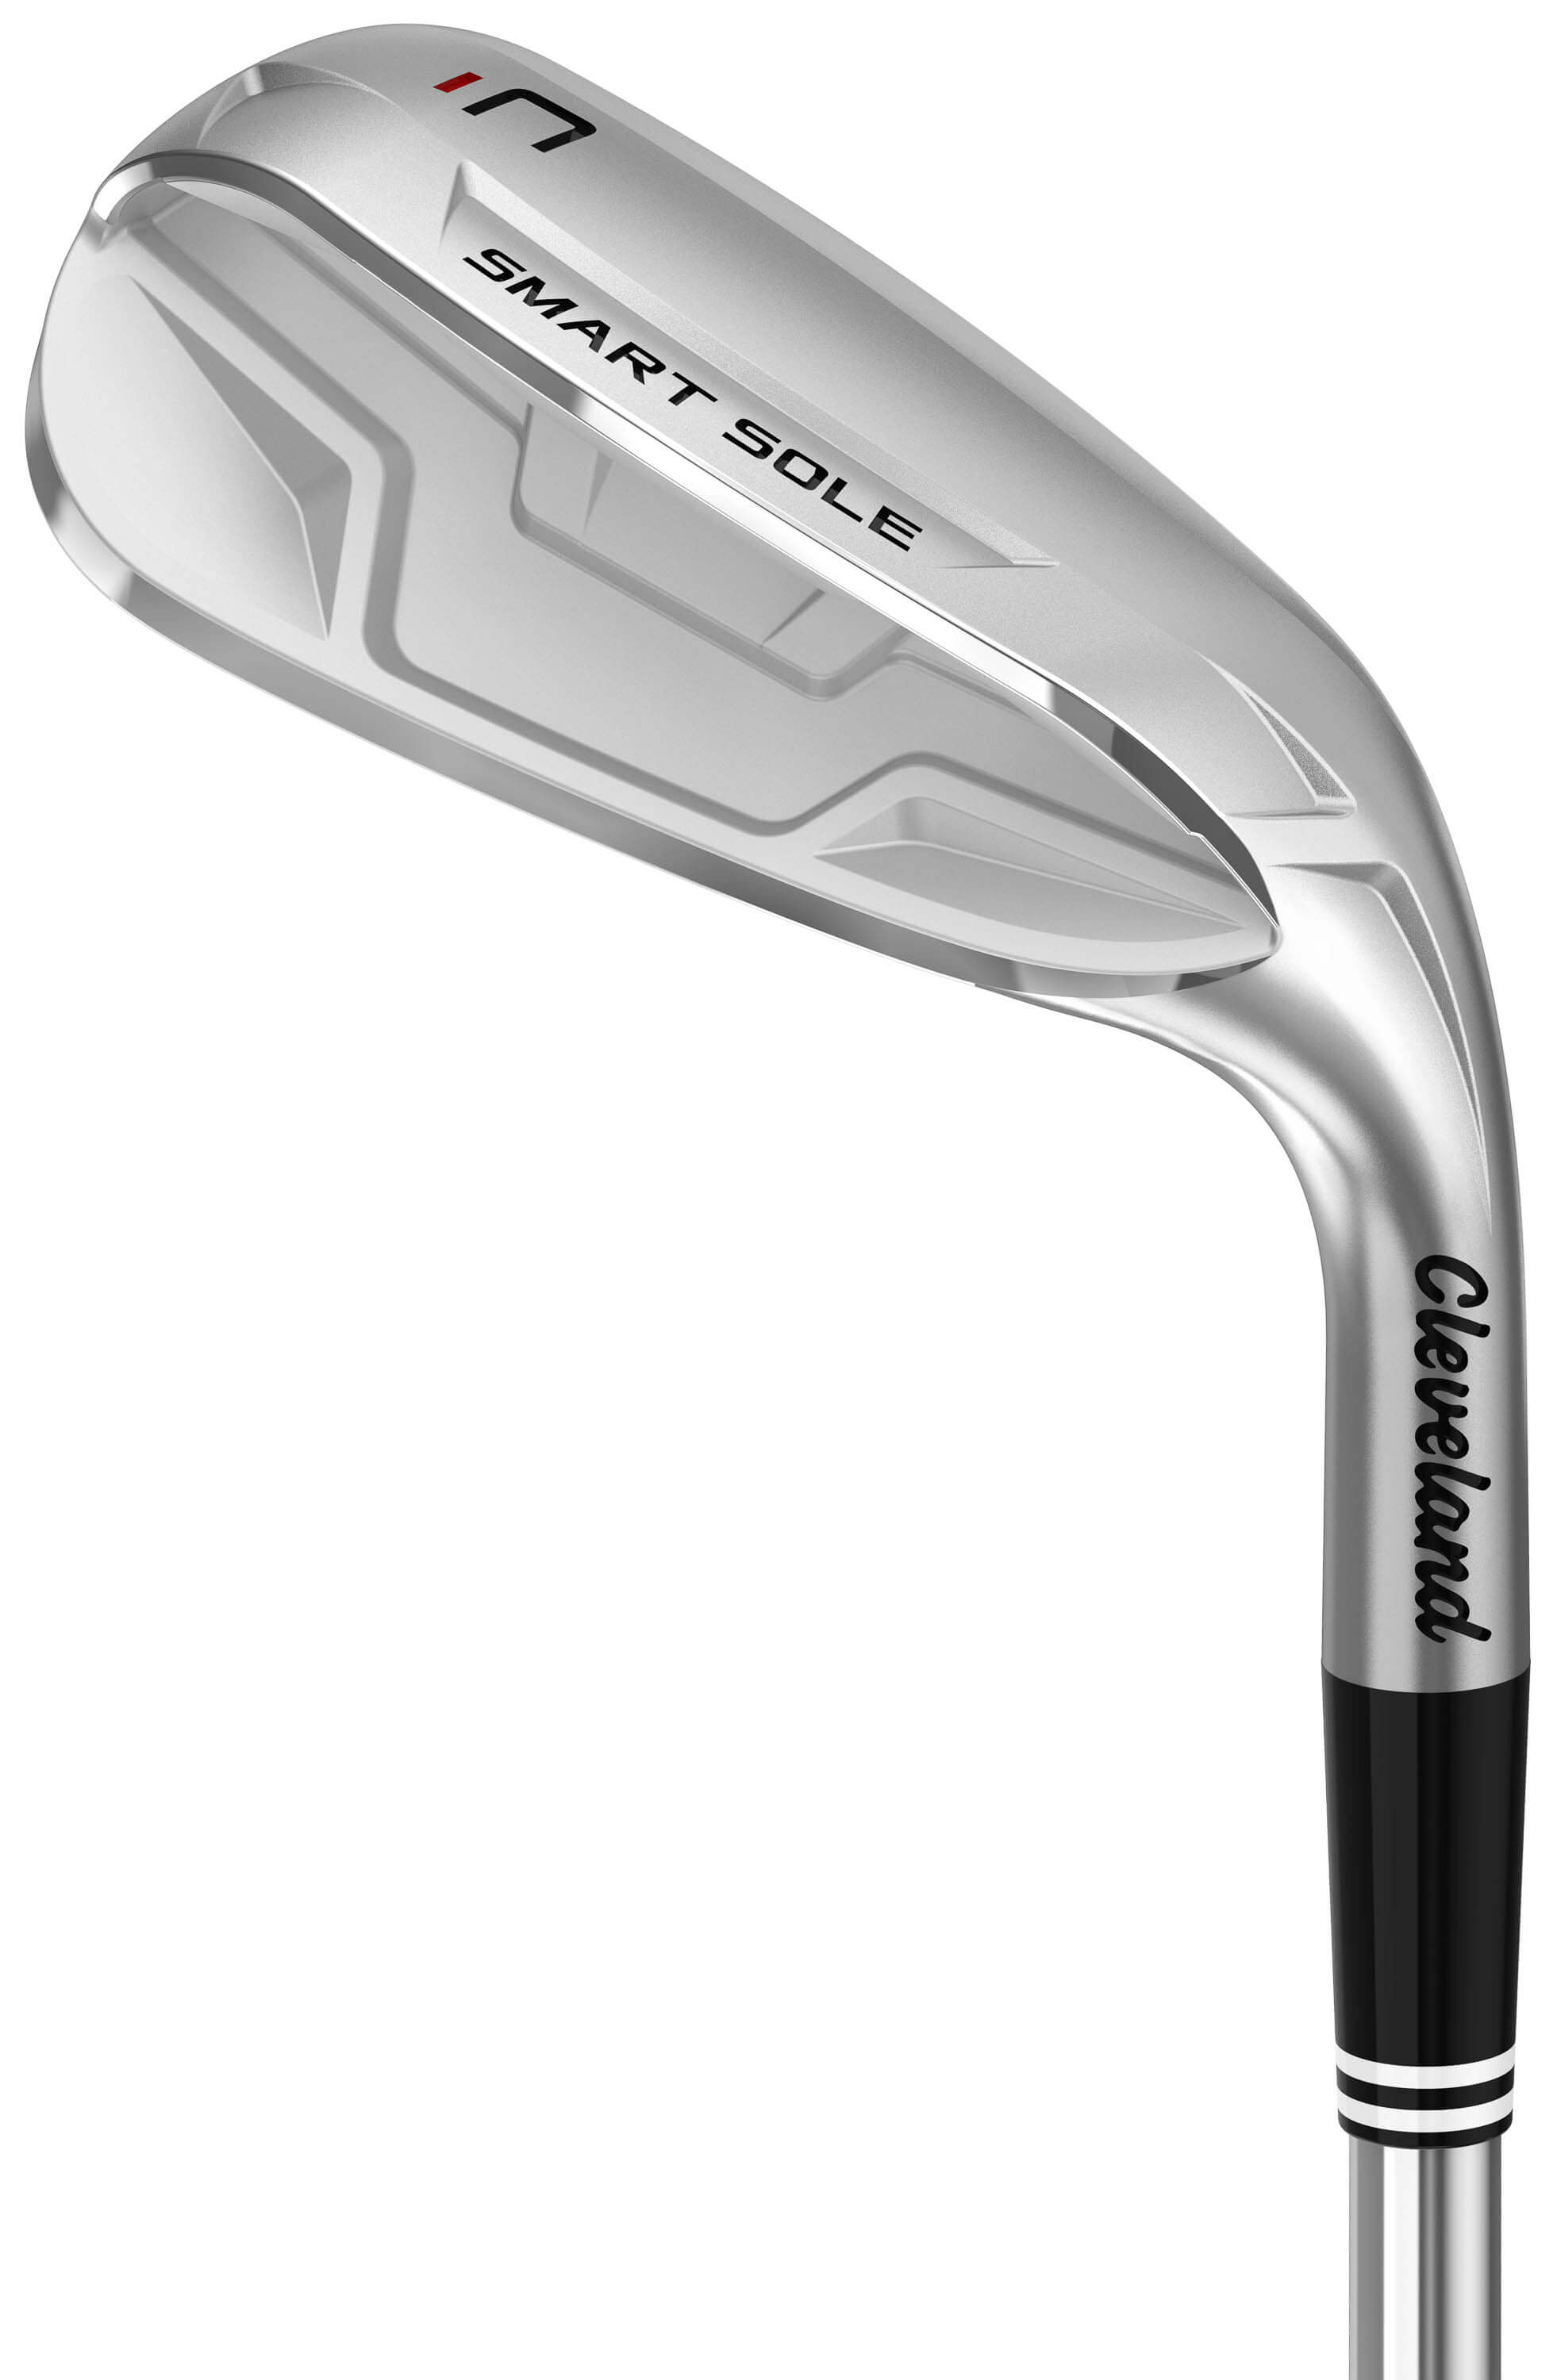 Cleveland Smart Sole 4.0 Wedge